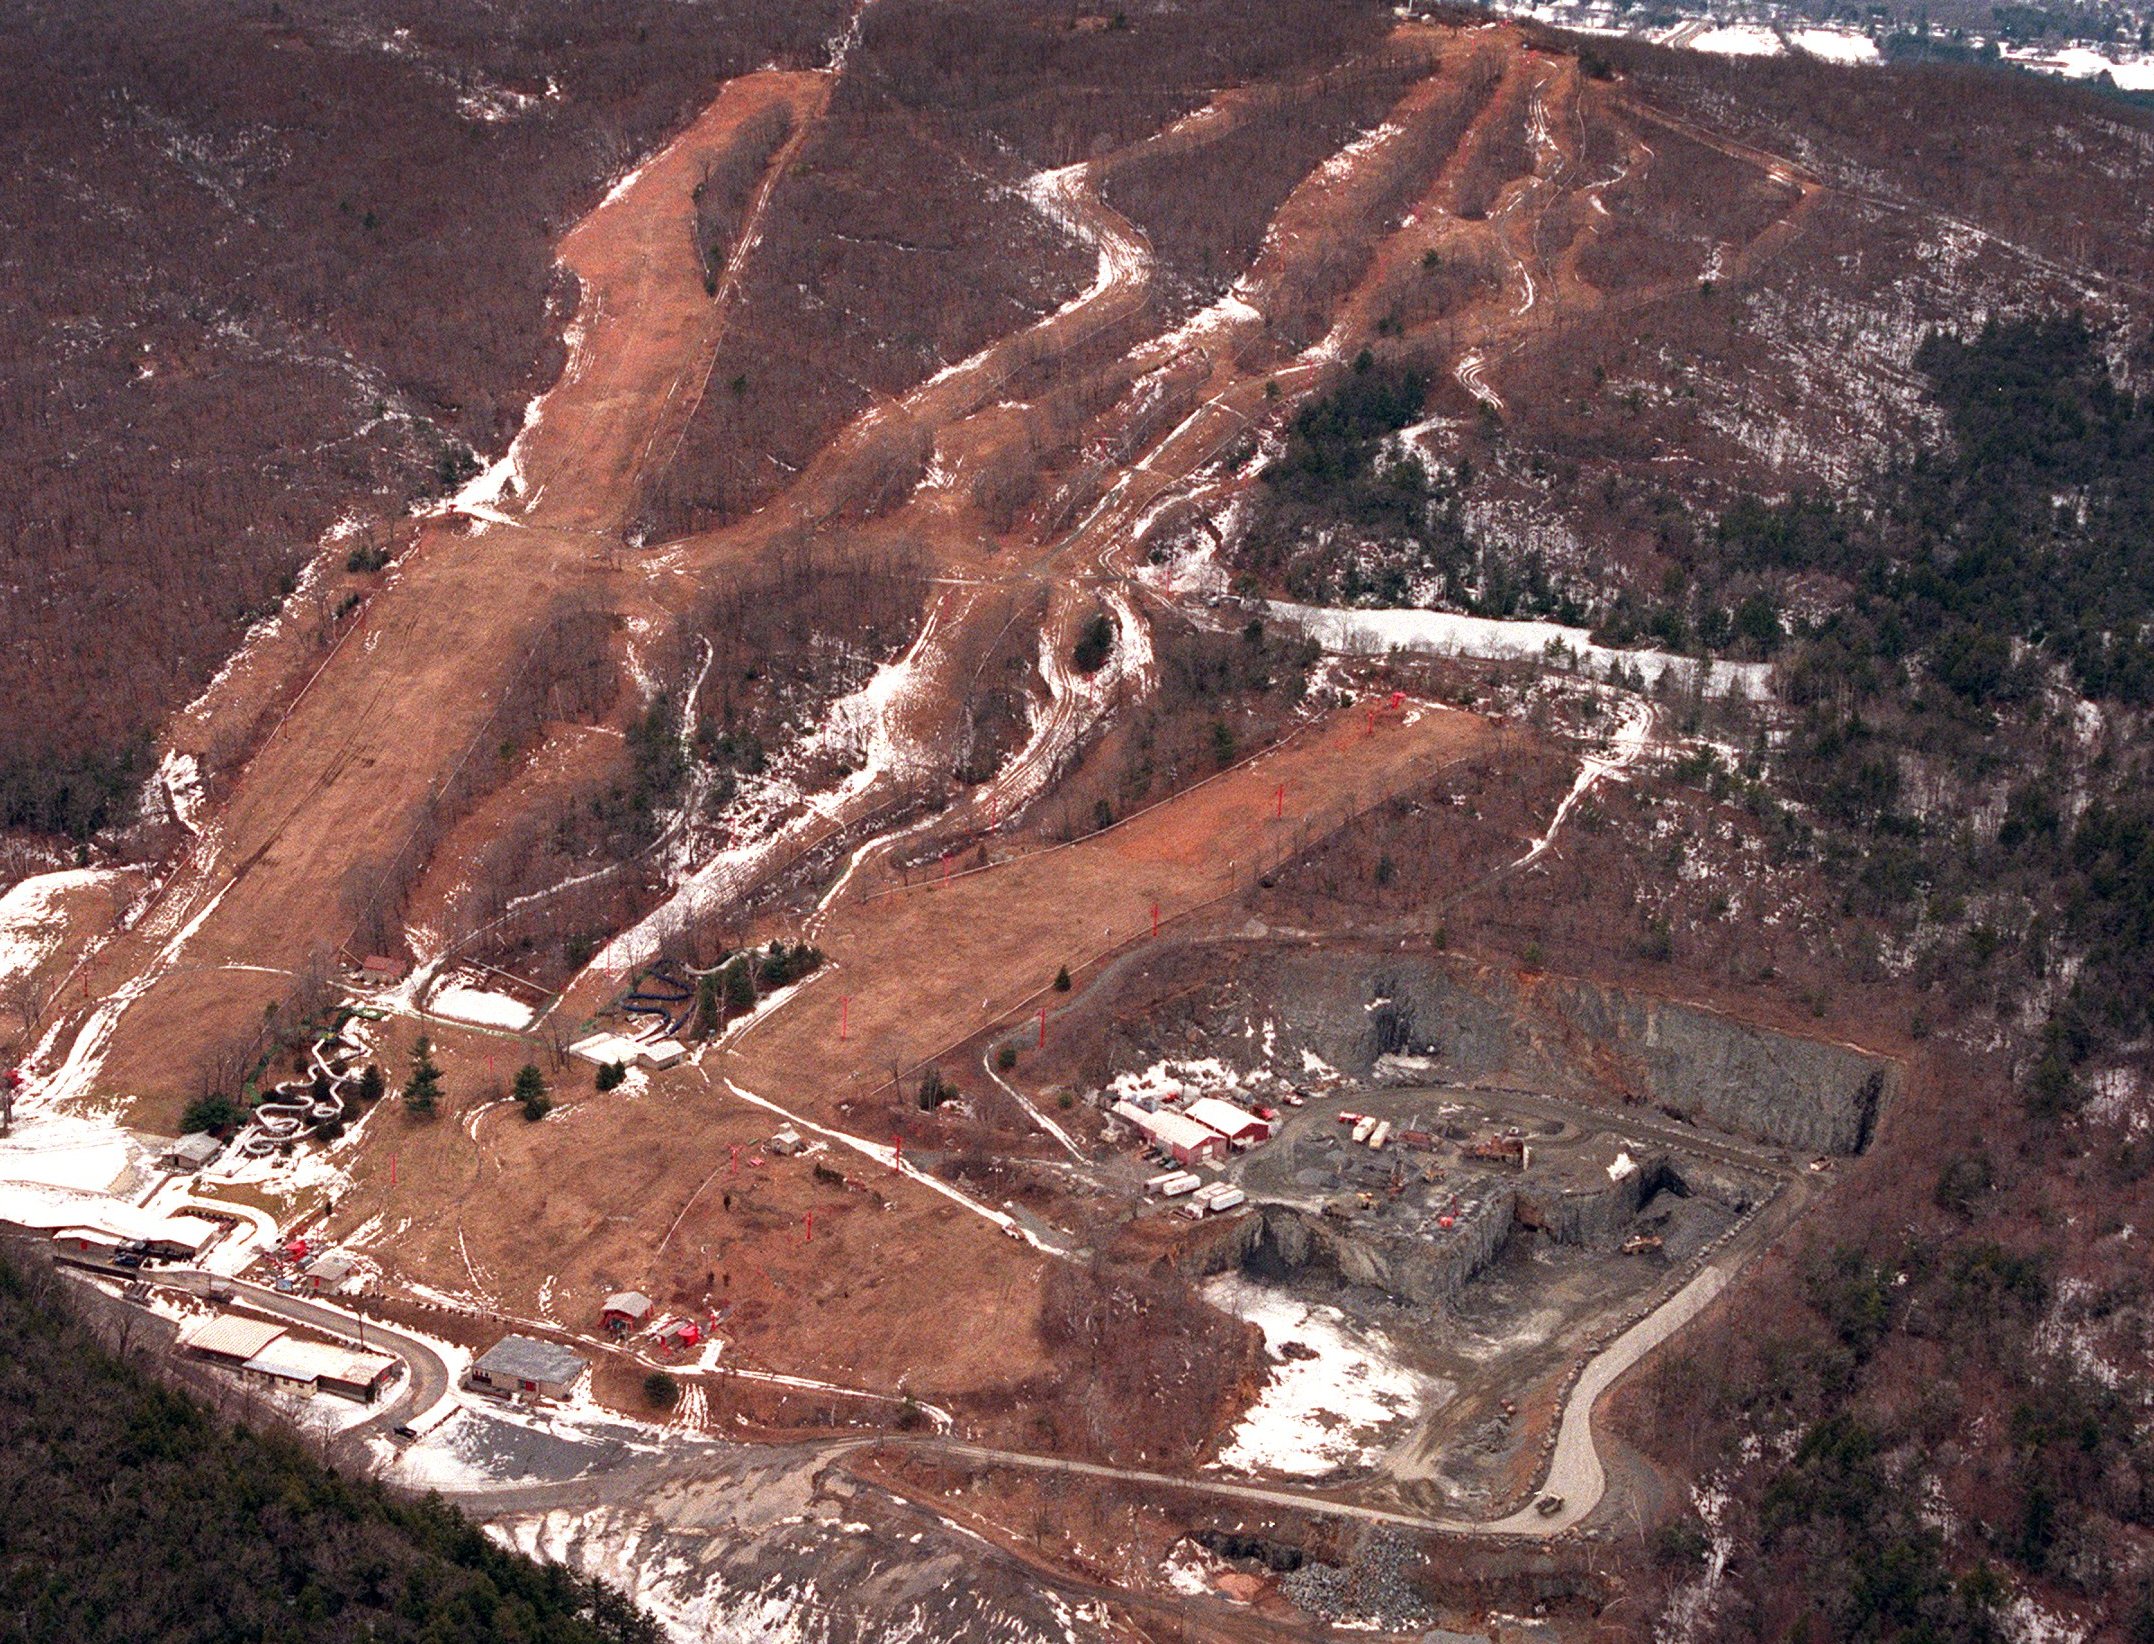 The quarry is shown here in operation in 1999.